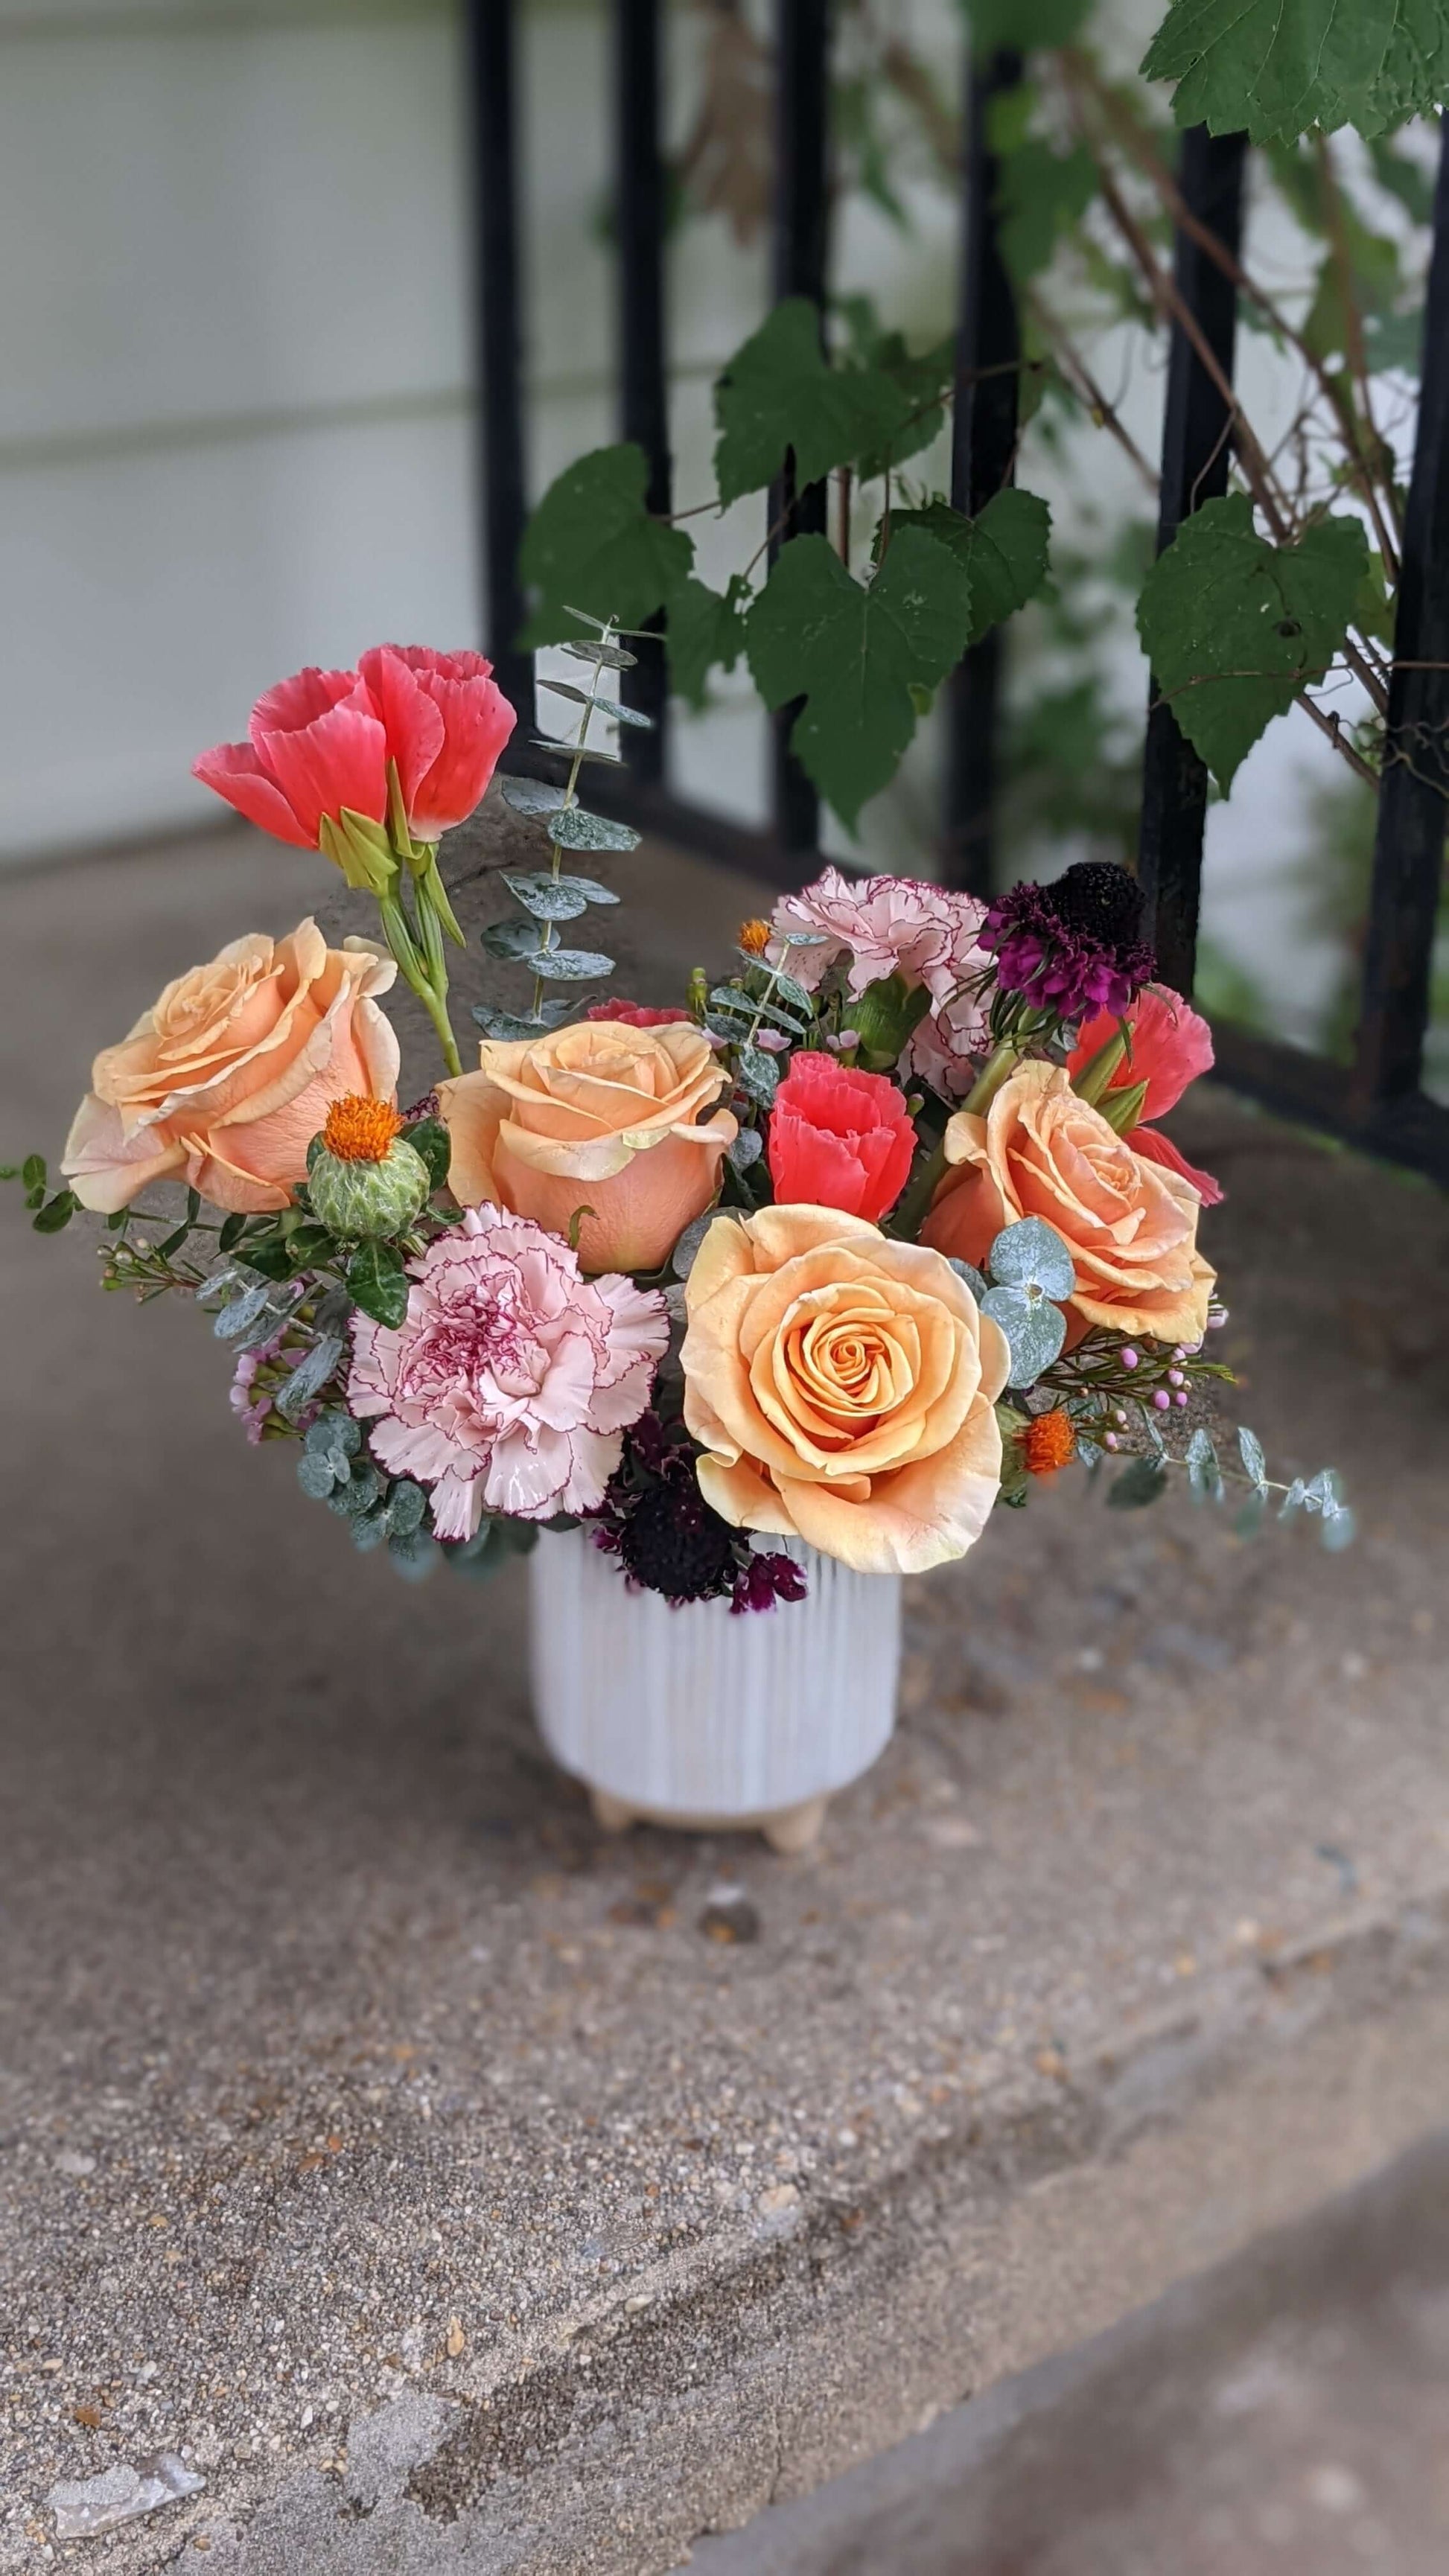 Petite and Sweet
A little something to brighten their day!Please include flower and color preferences. Some colors or flowers may not be available for same day orders.
Flower arrangement
FloralsbyHeidiCatherine